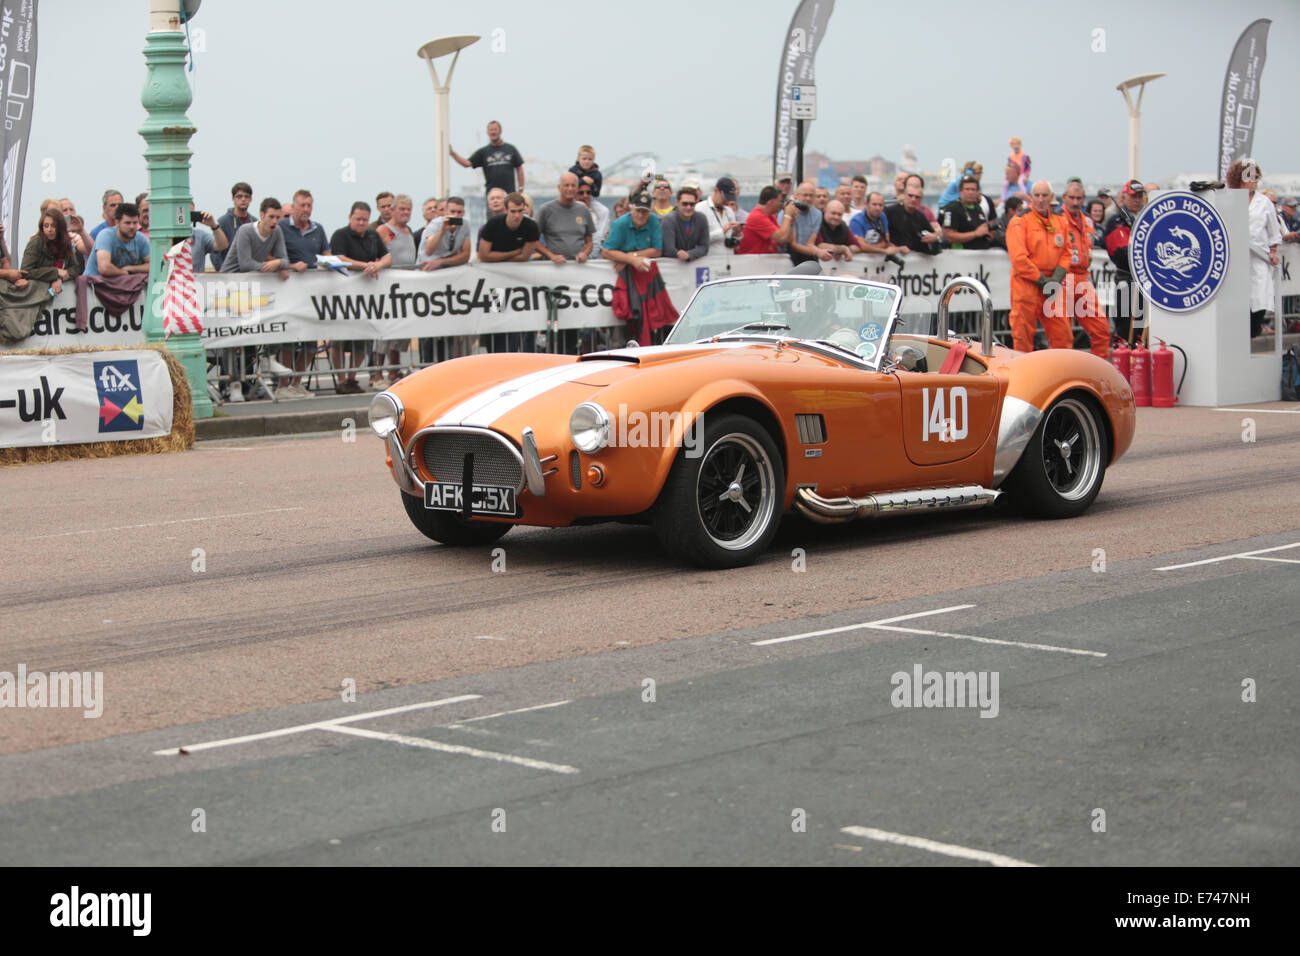 This is John Davey driving a Pilgrim Sumo AC Cobra Replica racing from the start line at the Brighton and Hove National Speed Trials an annual event at Madeira Drive, Brighton Seafront, Brighton, East Sussex, UK. 6th September 2014 Stock Photo